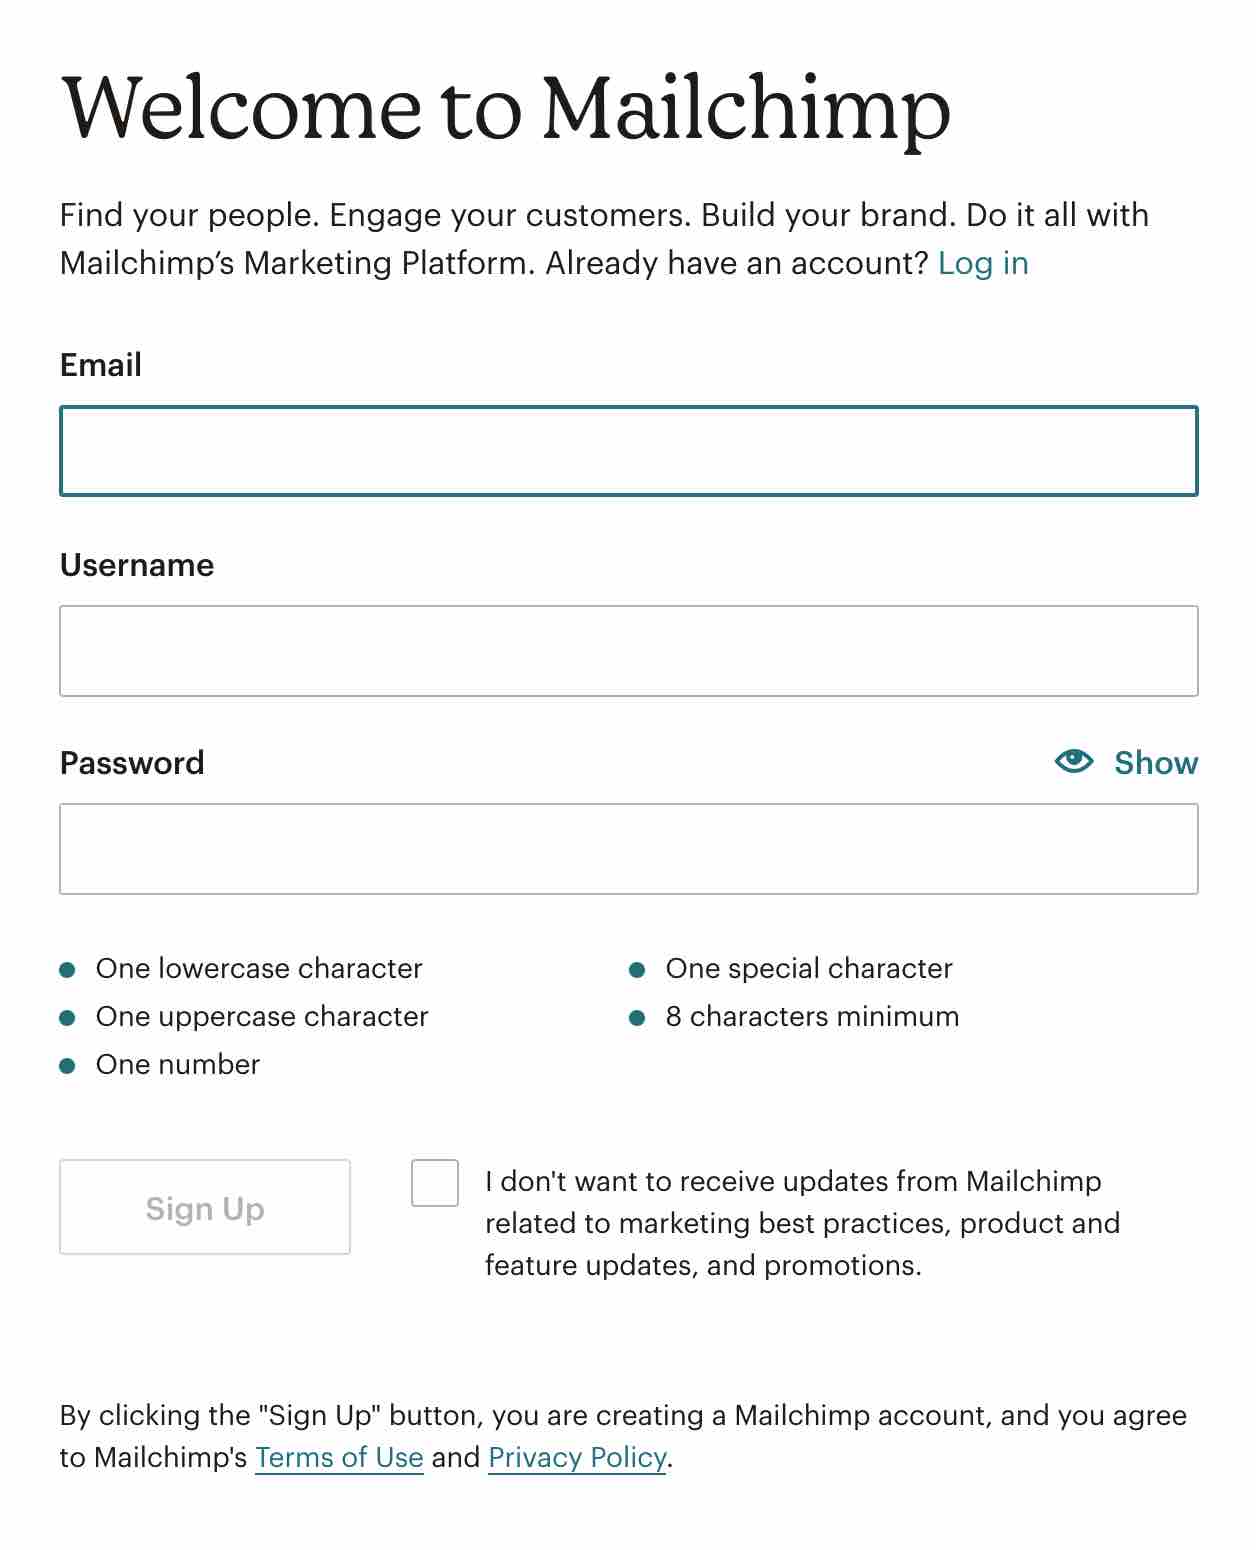 Account creation with Mailchimp's welcome form.